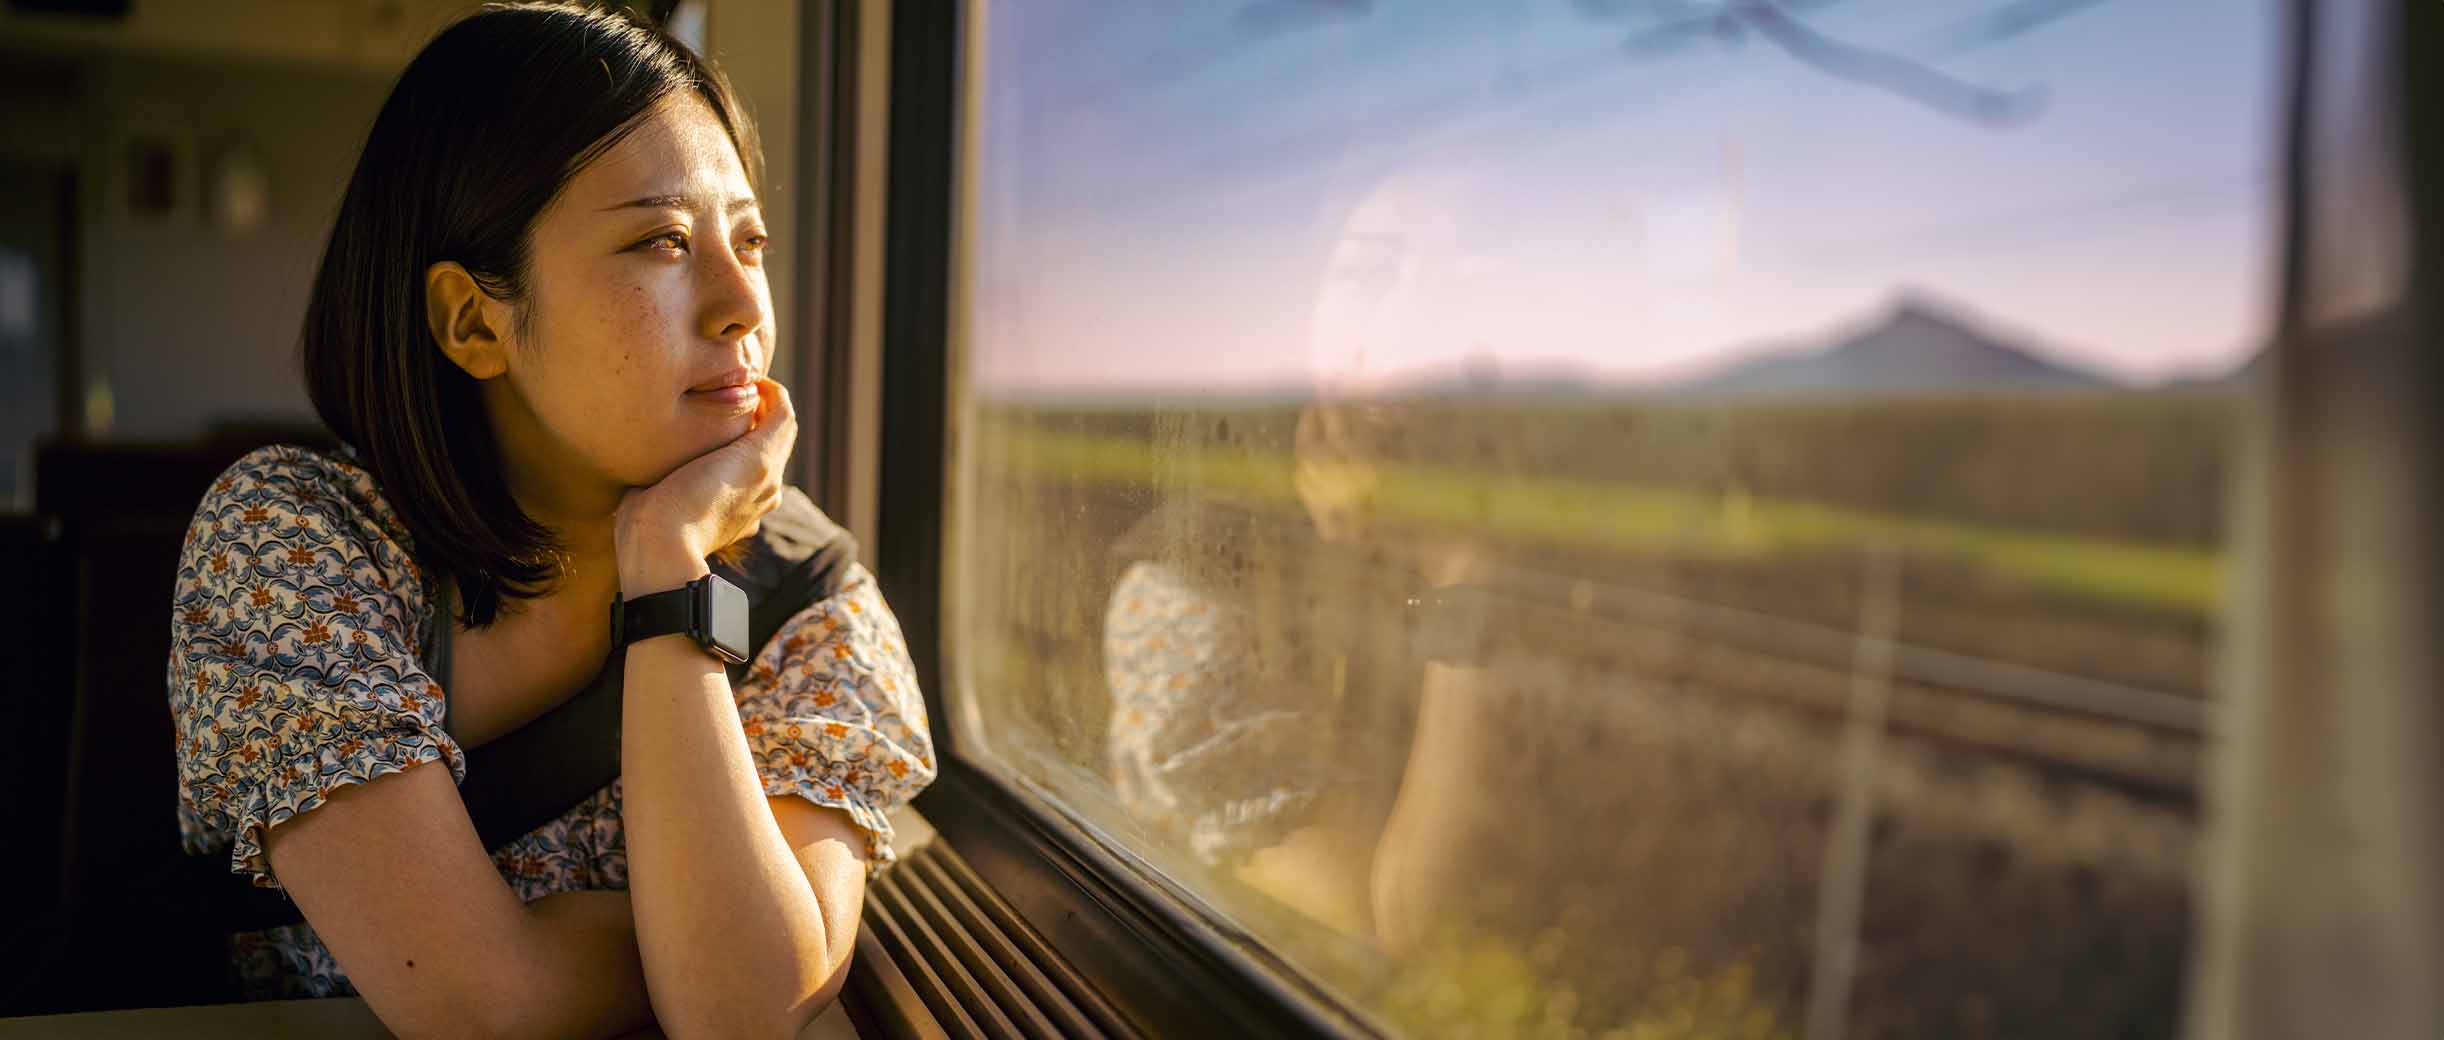 Woman looking out the window in a train.